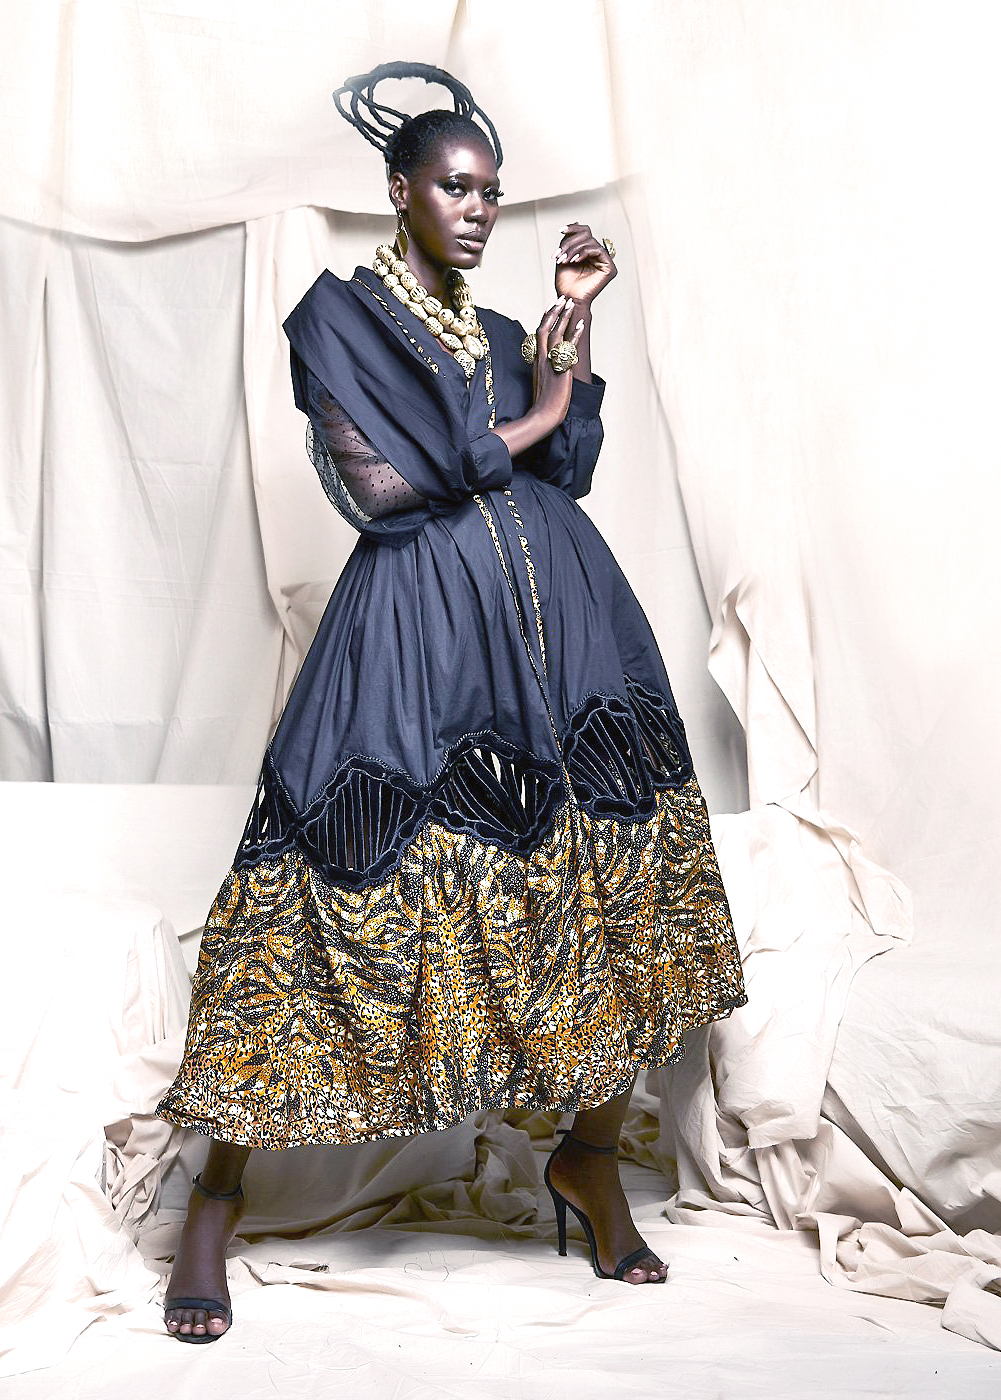 AFRICAN FASHION STYLE MAGAZINE - She is King AW19 by Christie Brown  - Look book with  Koro Amy International Model from Ivory Coast - Photographer DAN NGU - Media Partner DN AFRICA - STUDIO 24 NIGERIA - STUDIO 24 INTERNATIONAL - Ifeanyi Christopher Oputa MD AND CEO OF COLVI LIMITED AND STUDIO 24 - CHEVEUX CHERIE and CHEVEUX CHERIE STUDIO BY MARIEME DUBOZ- Fashion Editor Nahomie NOOR COULIBALY